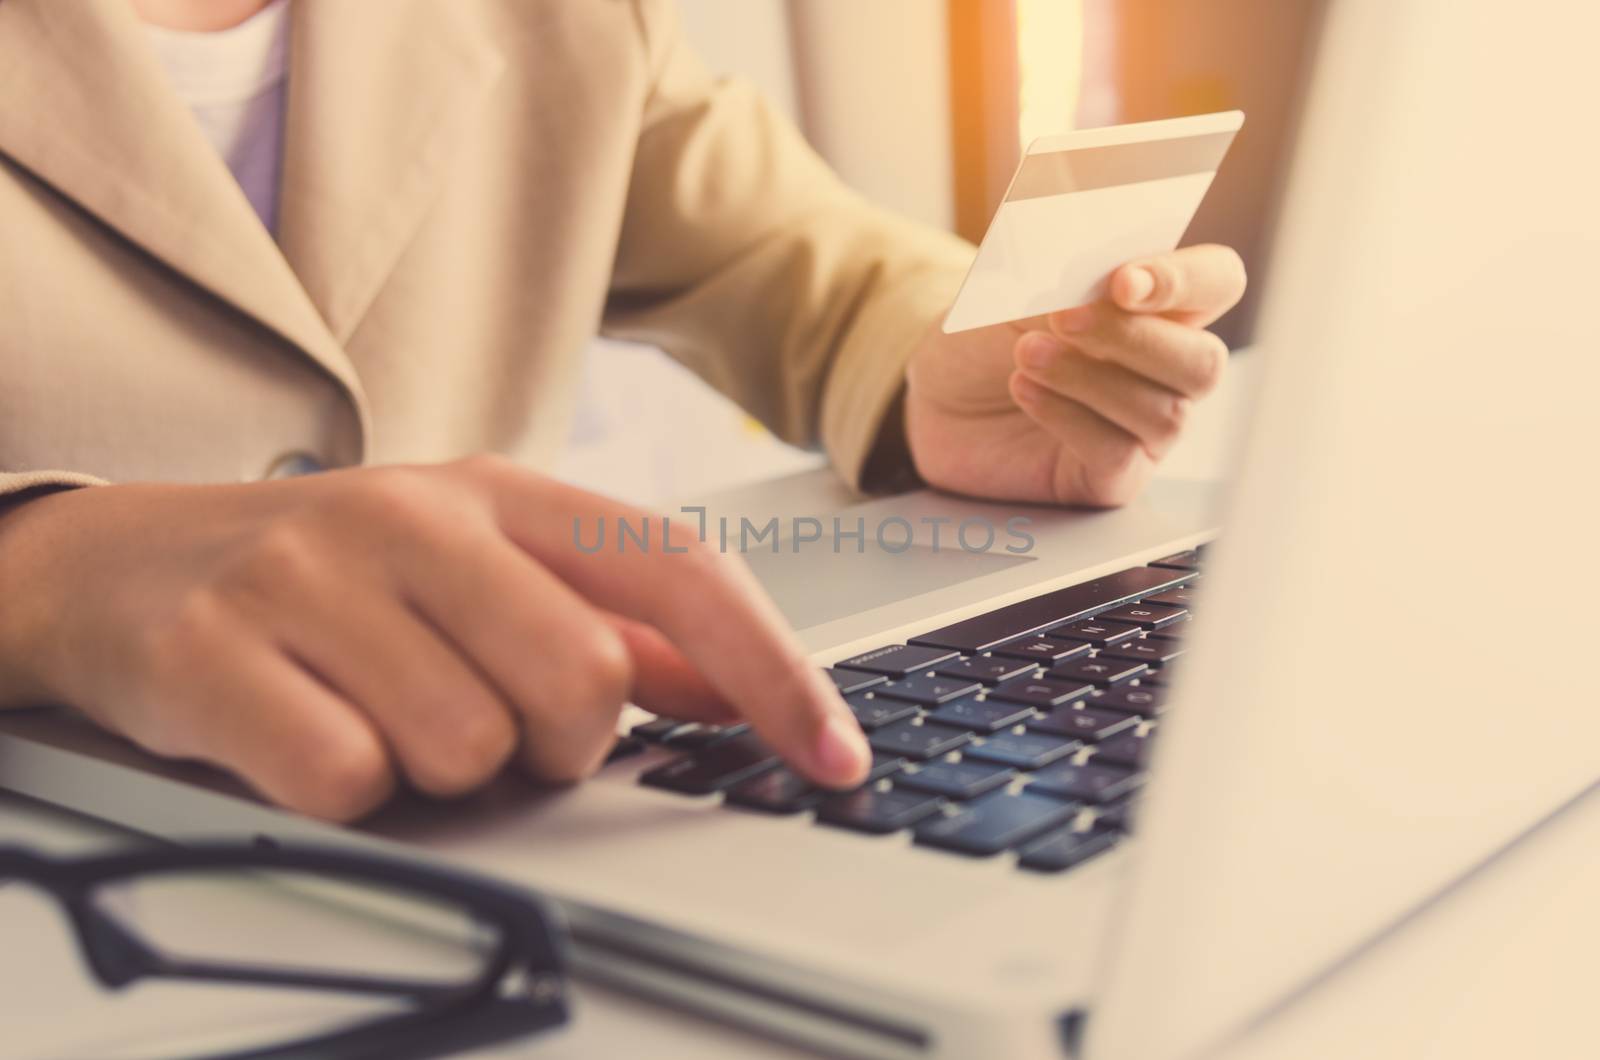 Credit Card Holders and Used Laptops Ordering and Payment - Concepts of Using Technology in Business